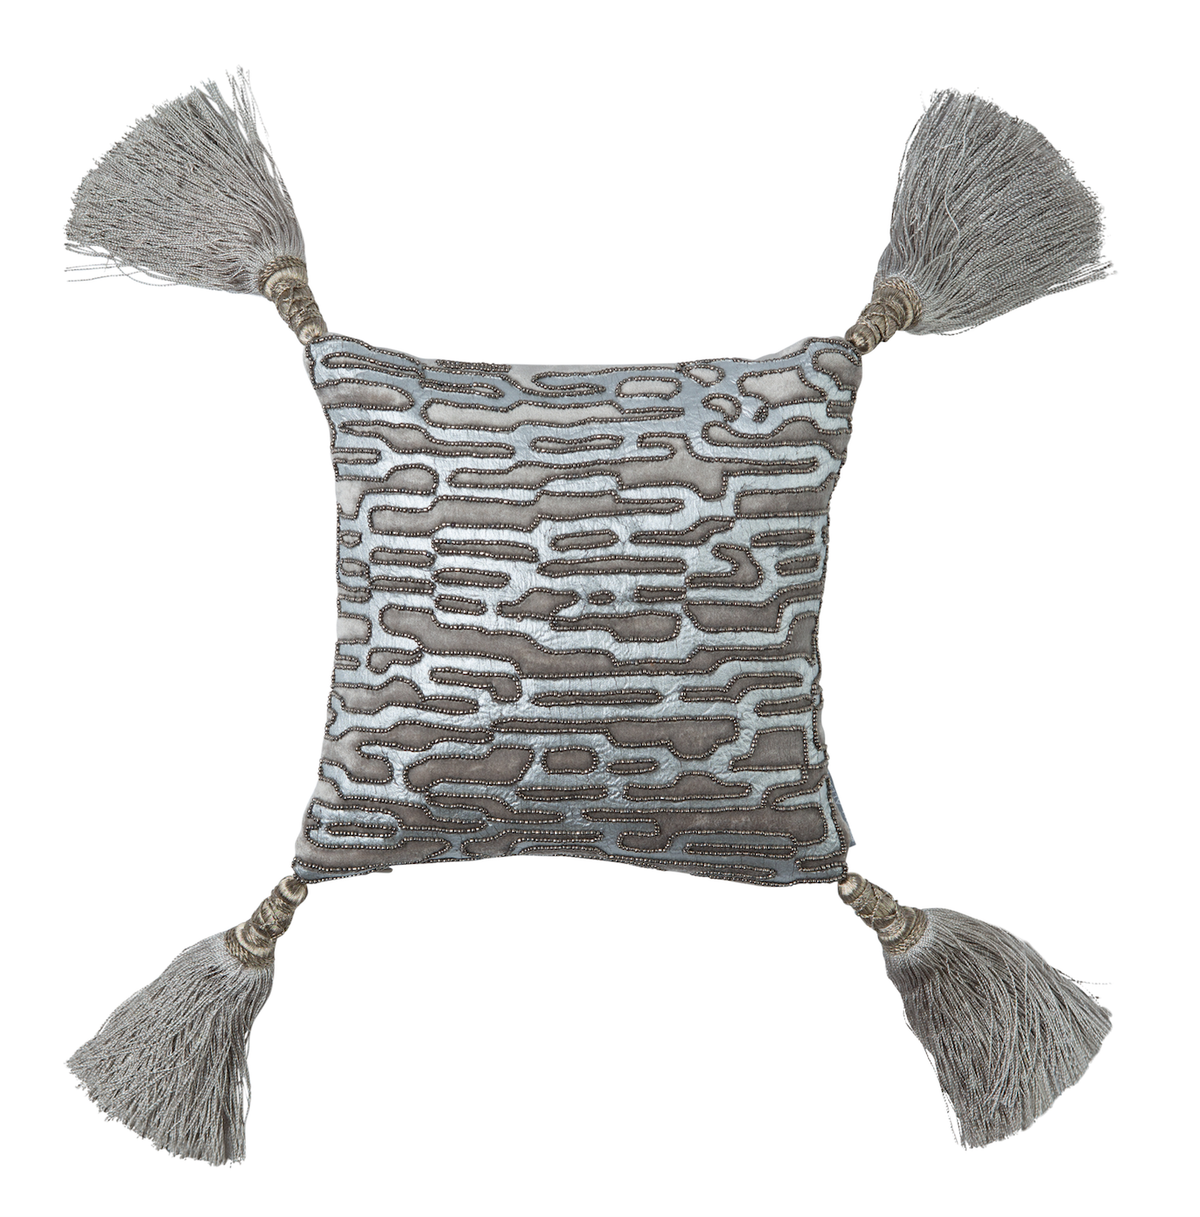 Christian Platinum Velvet with Silver Beads Pillow by Lili Alessandra